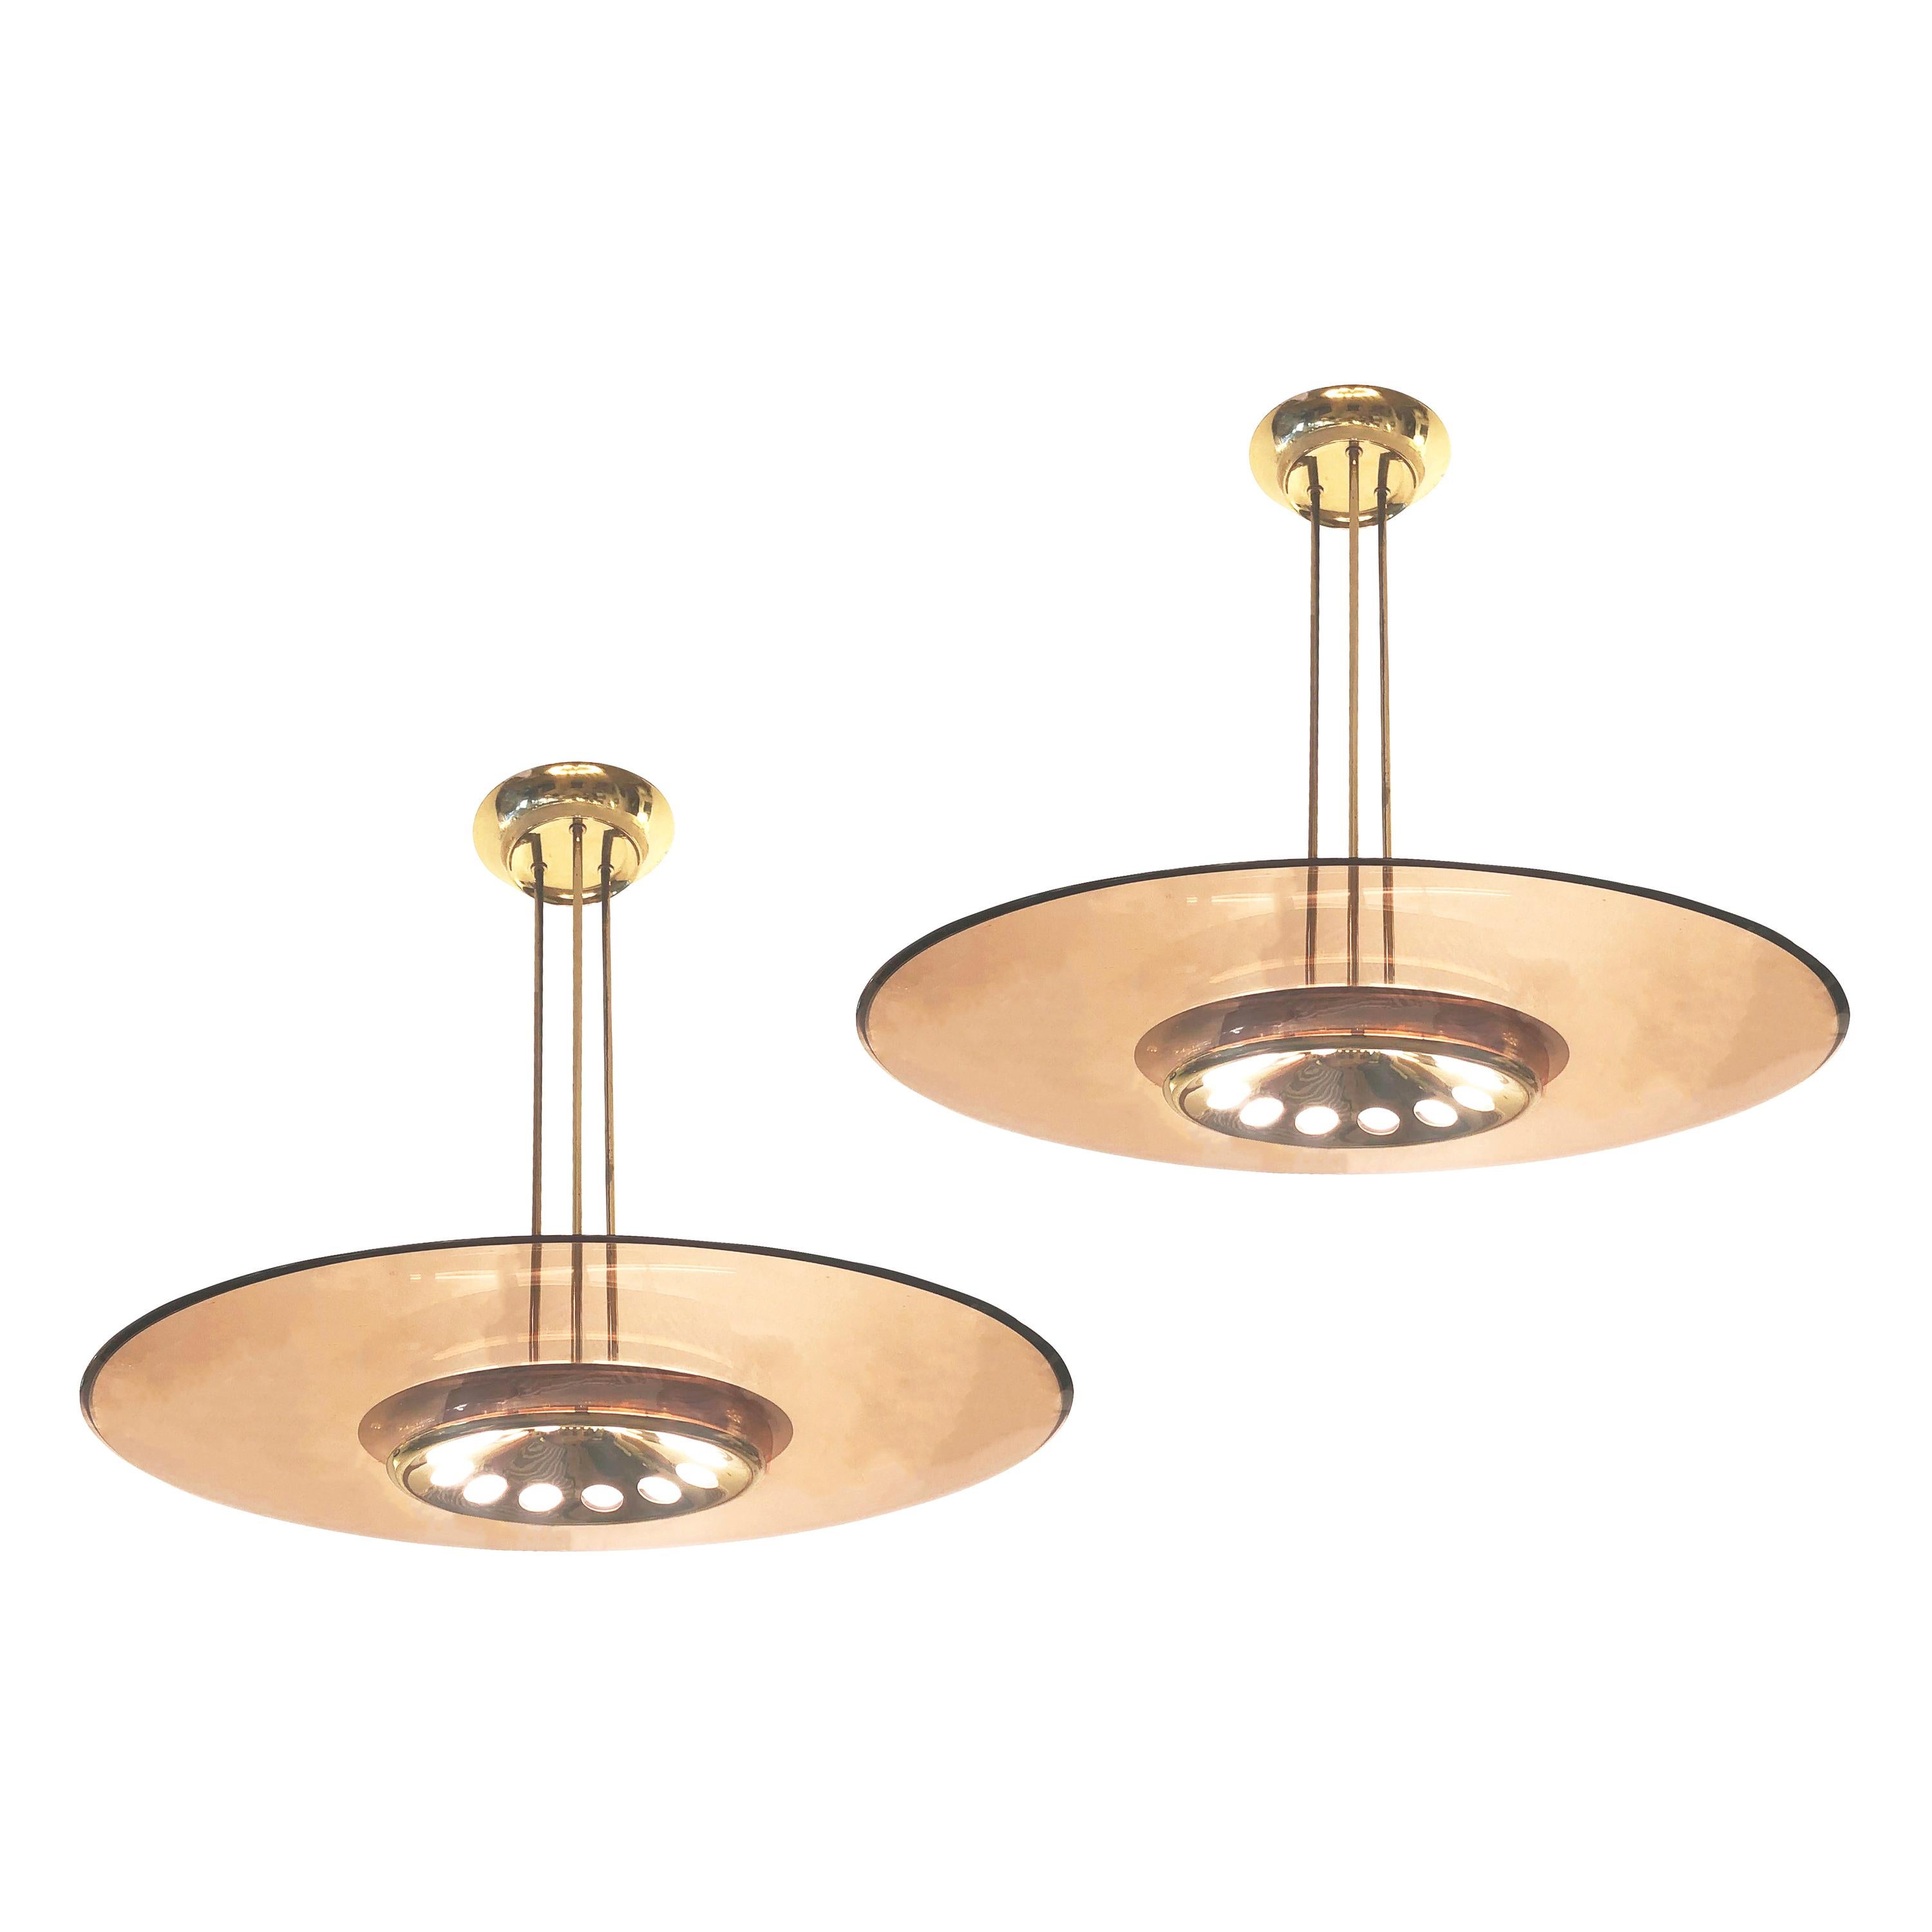 Fontana Arte Ceiling Light Model 1508 by Max Ingrand, 2 Available